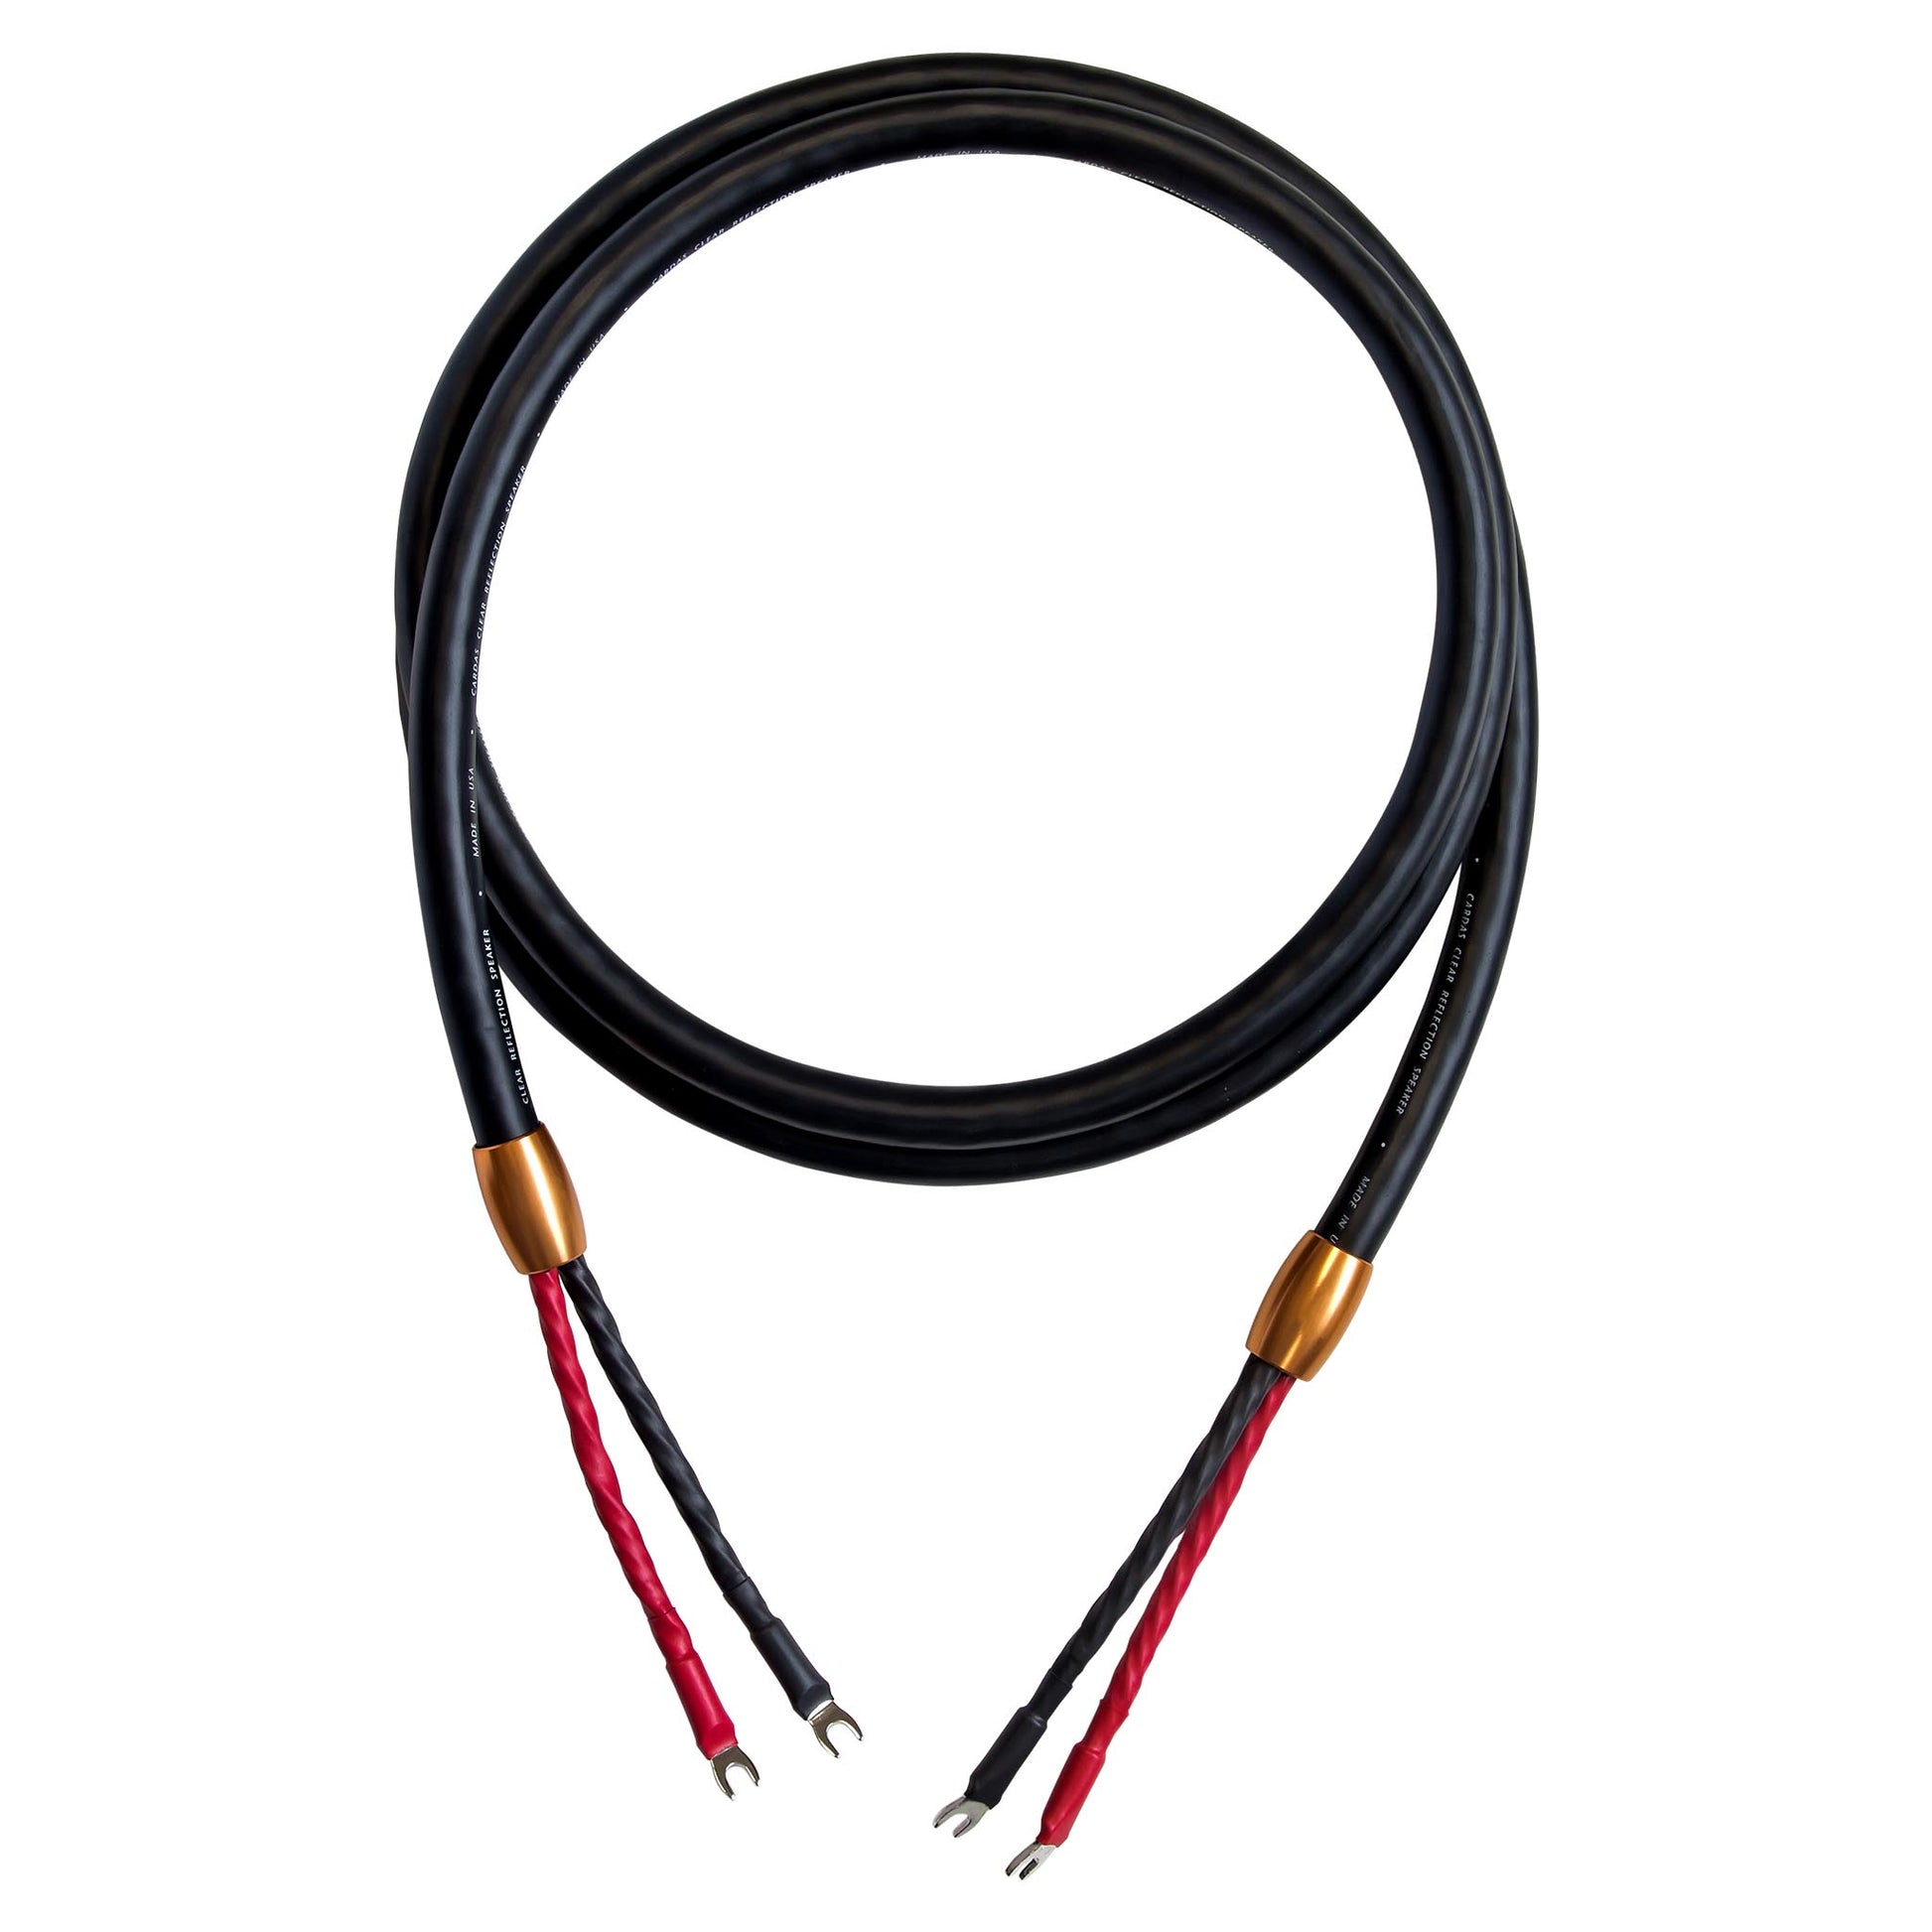 Cardas Audio's Clear Beyond Speaker Cable – The Cable Company